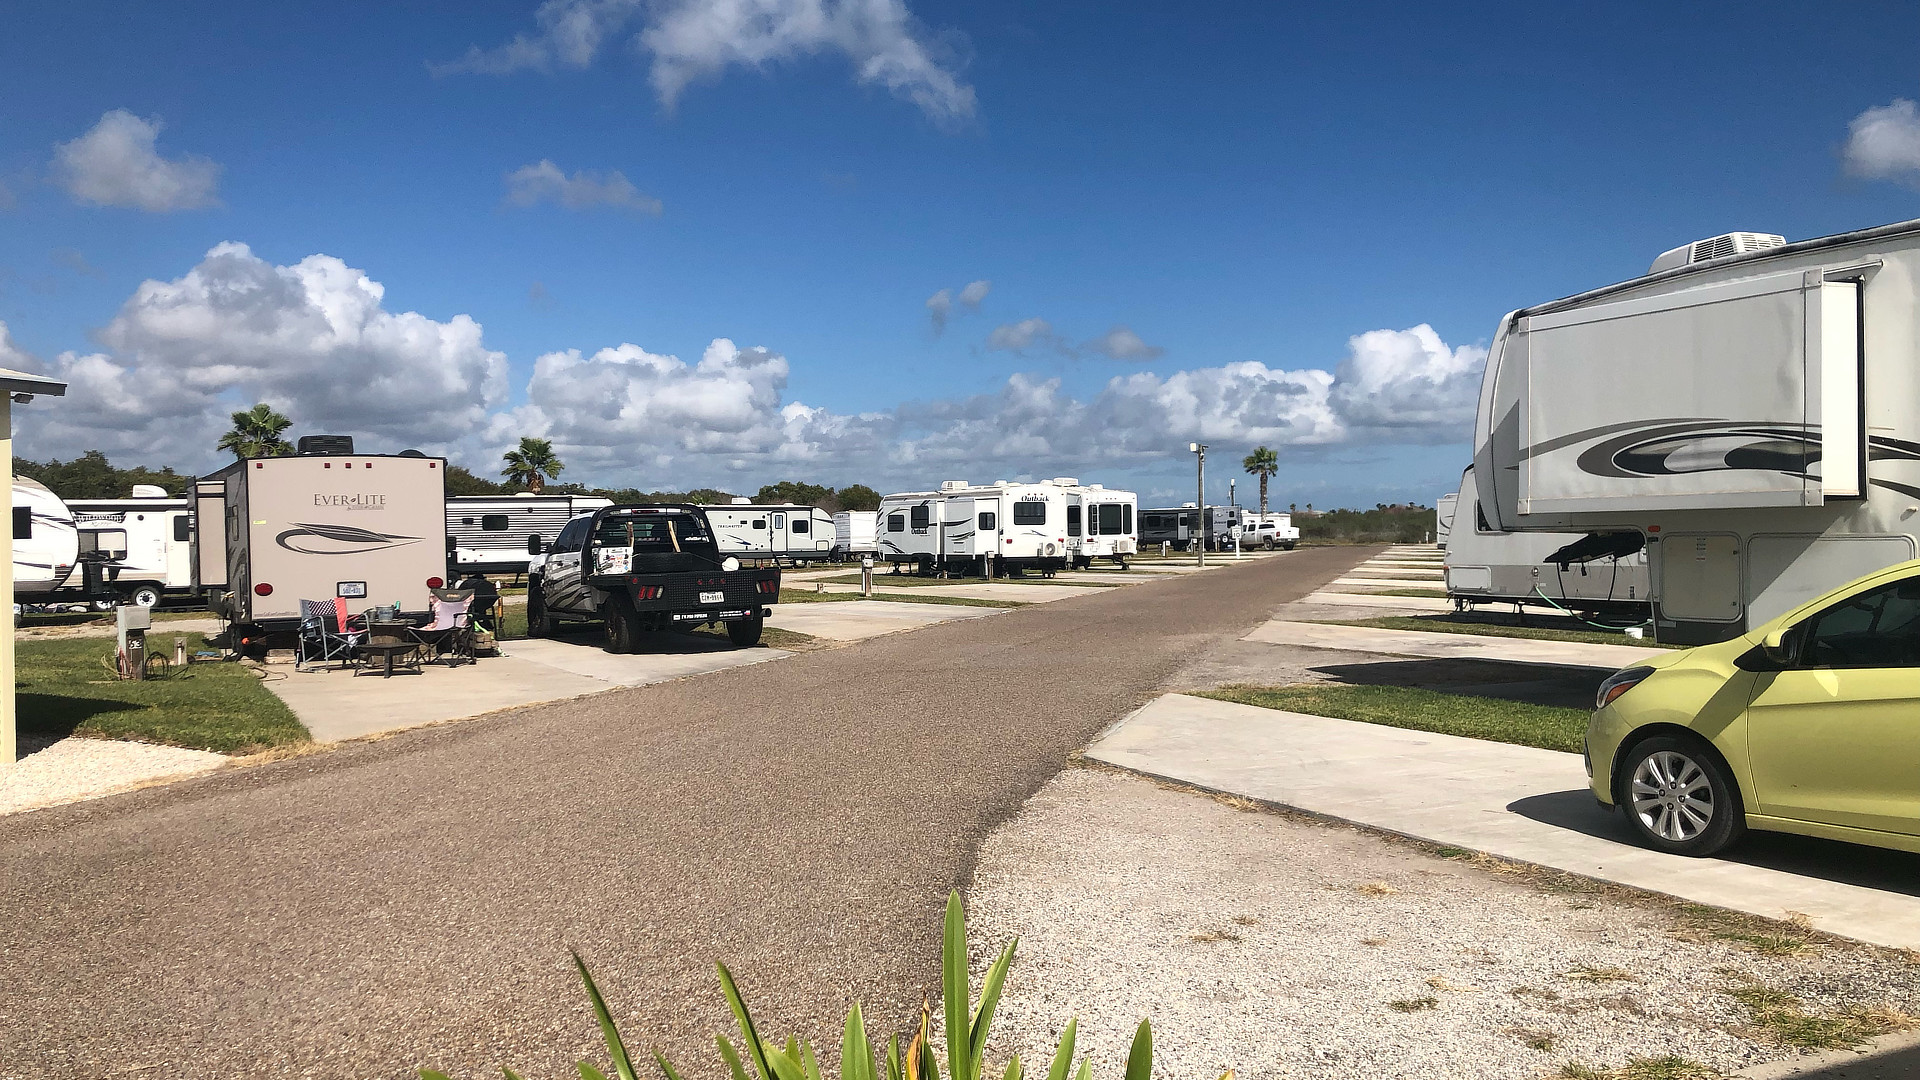 Sunny road with RVs parked on the side